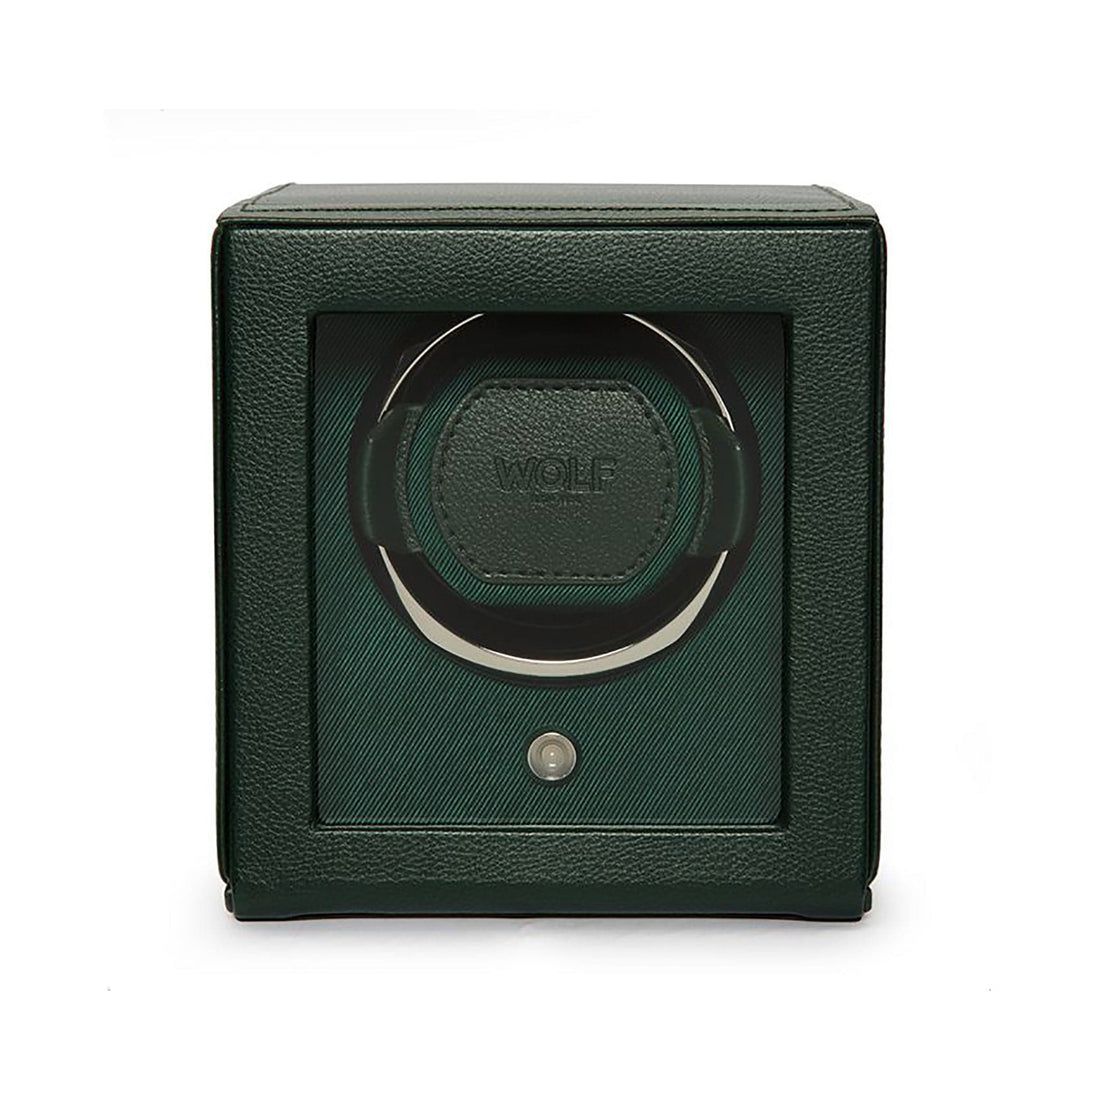 Cub Single Watch Winder with Cover by WOLF - Skeie's Jewelers